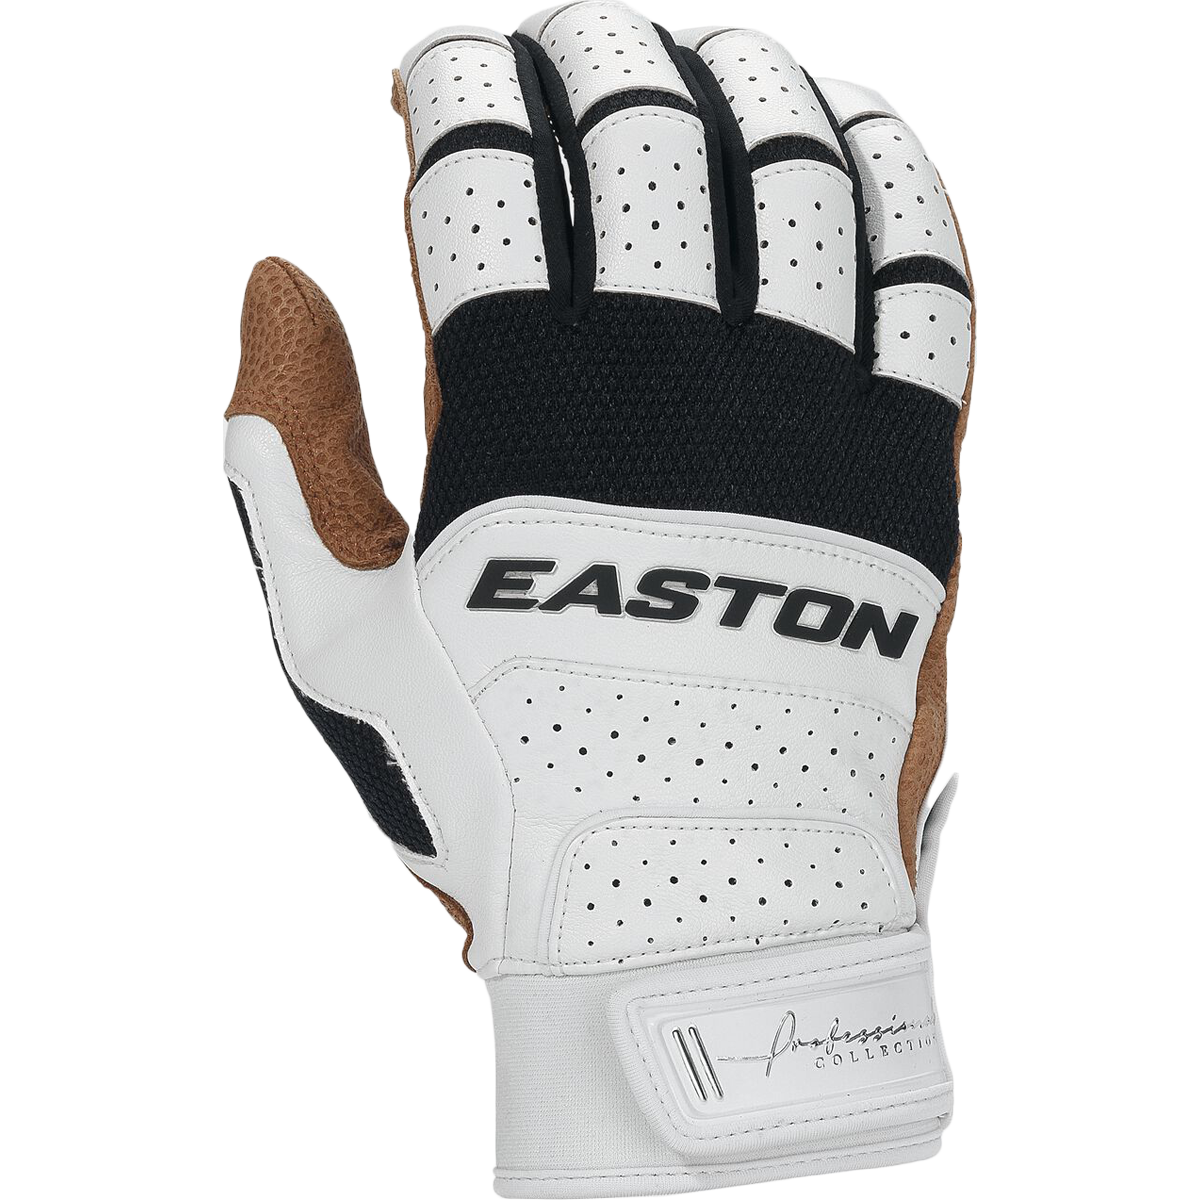 Professional Collection Batting Glove alternate view